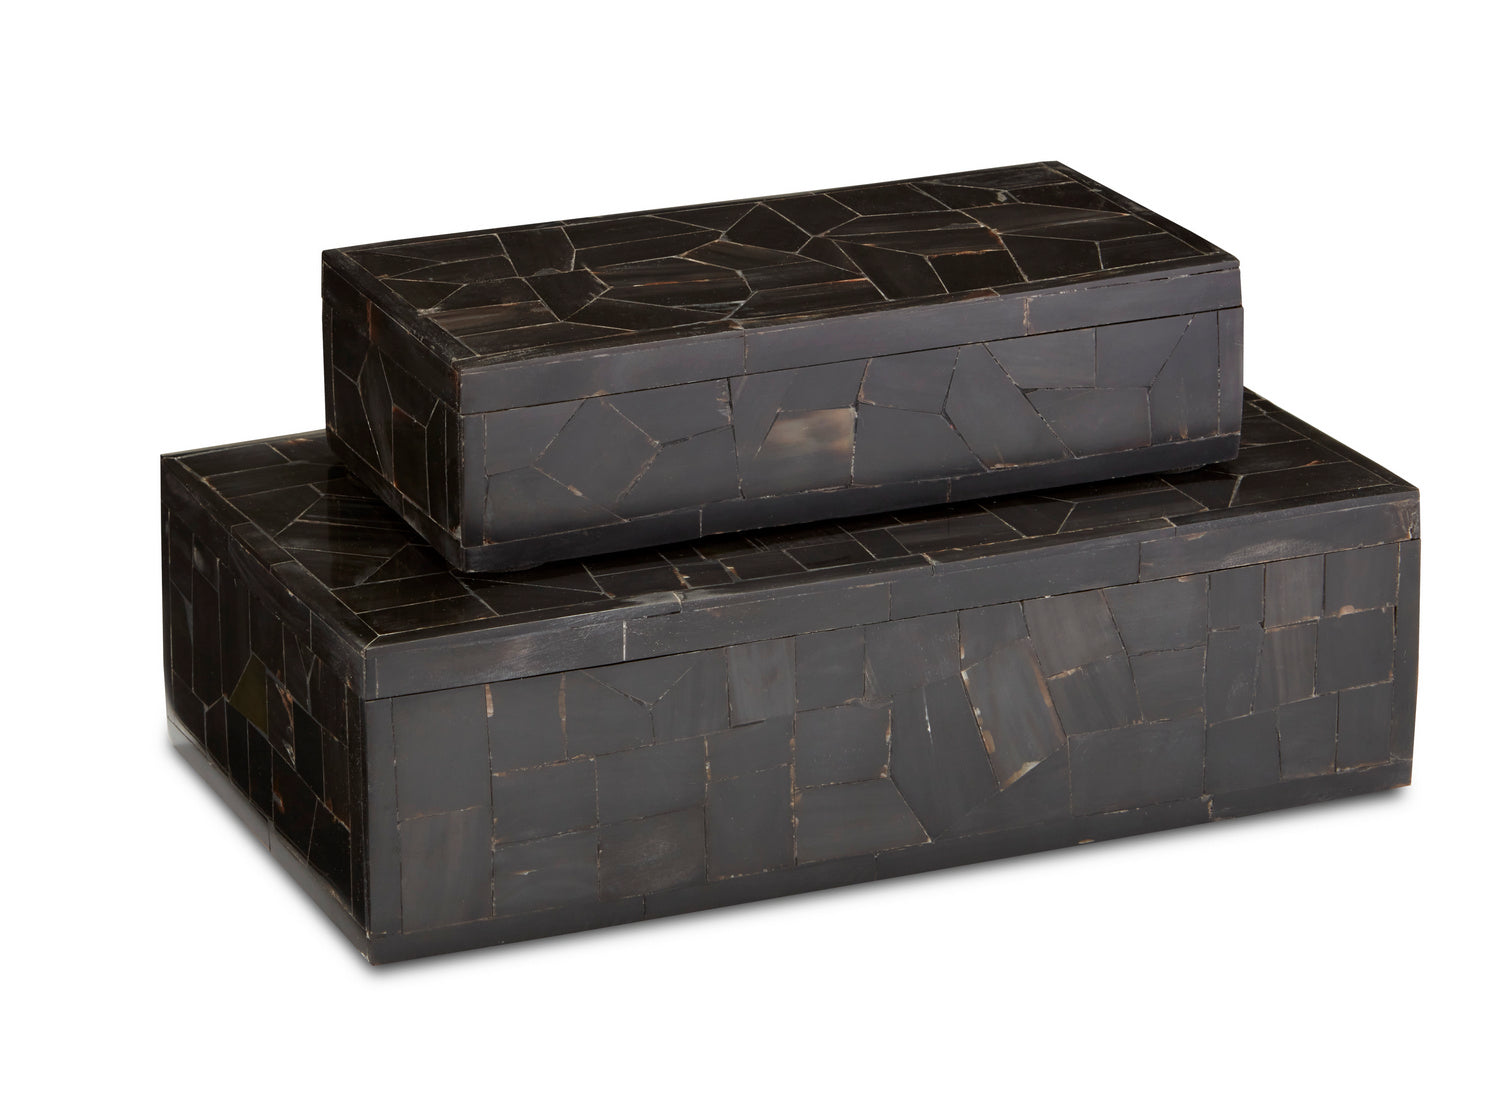 Box Set of 2 from the Black Bone collection in Black finish